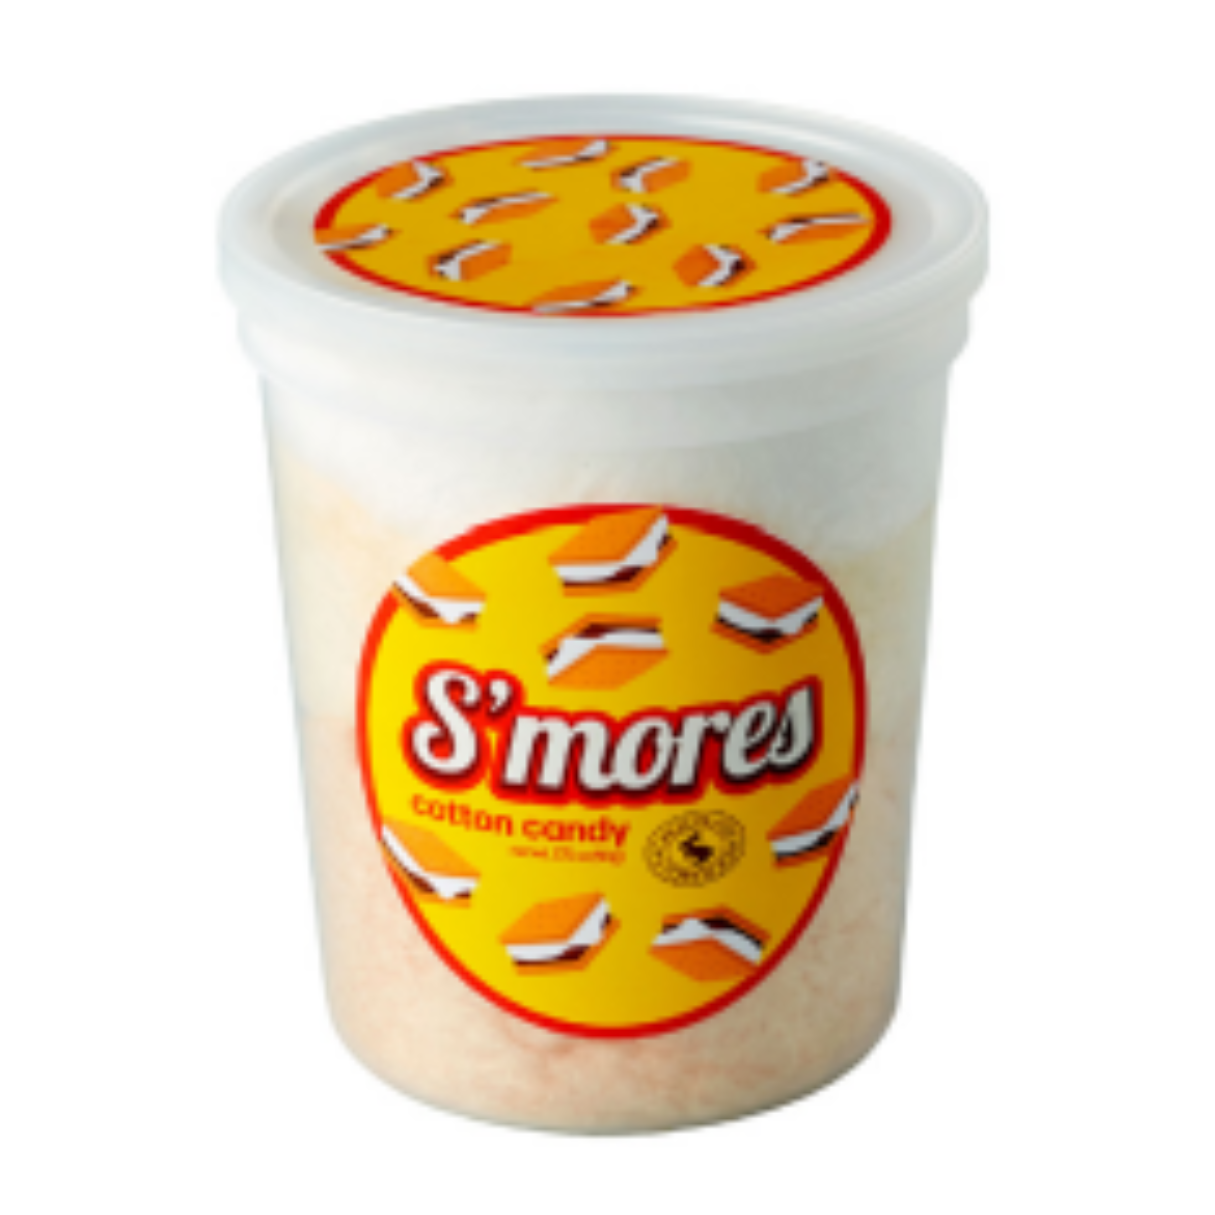 S’mores Cotton candy 1.75oz - 12ct